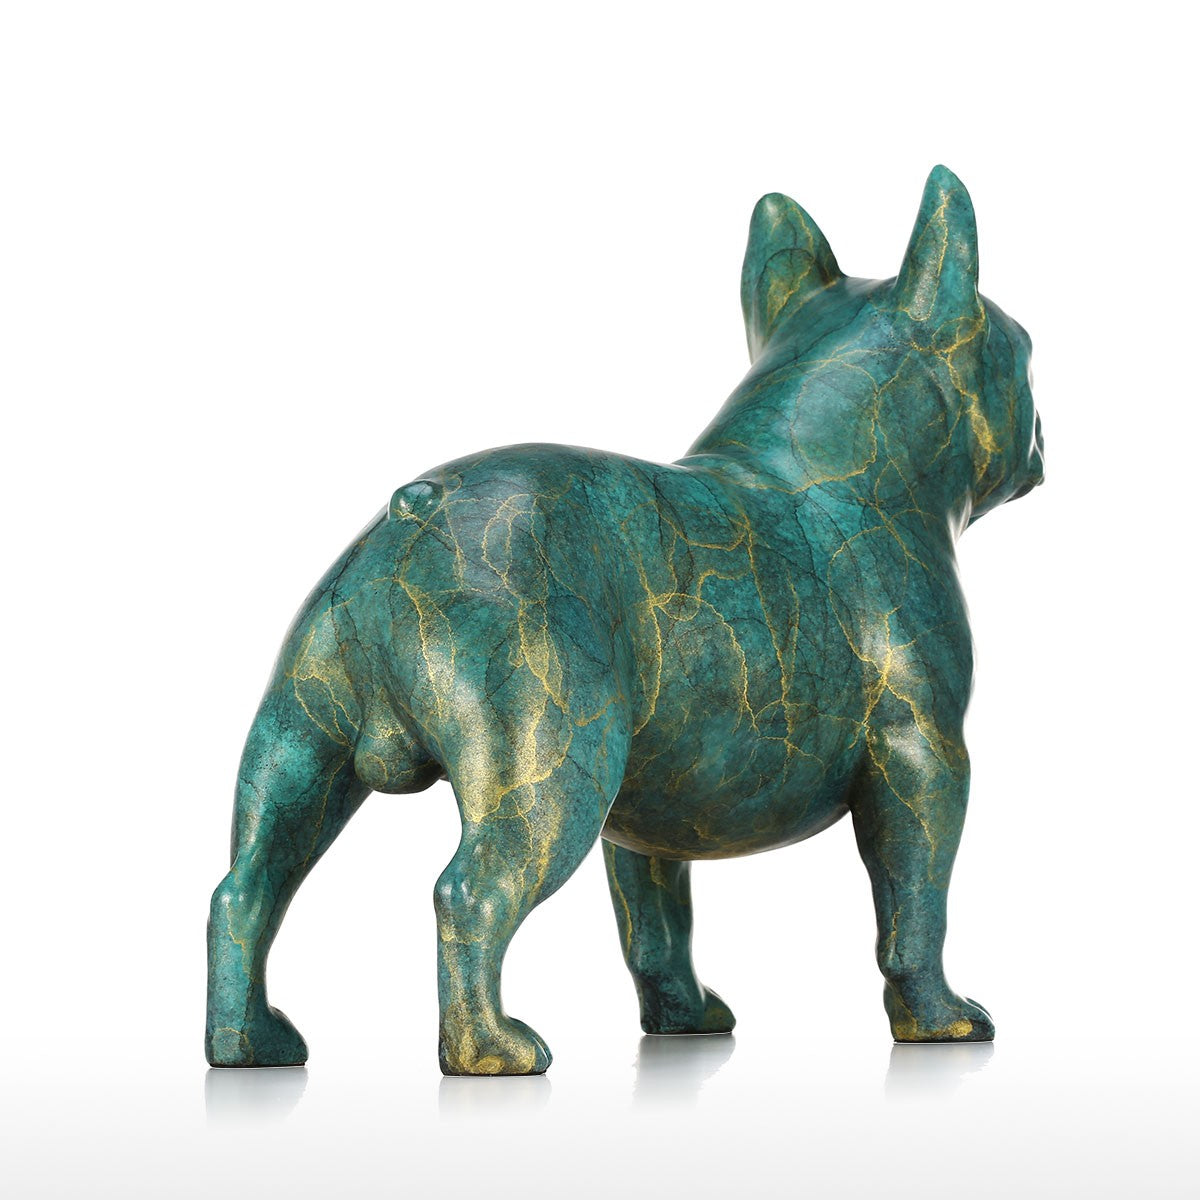 Special Christmas Gifts or Awesome Christmas Gifts  with French Bulldog Statue for Christmas Decorations